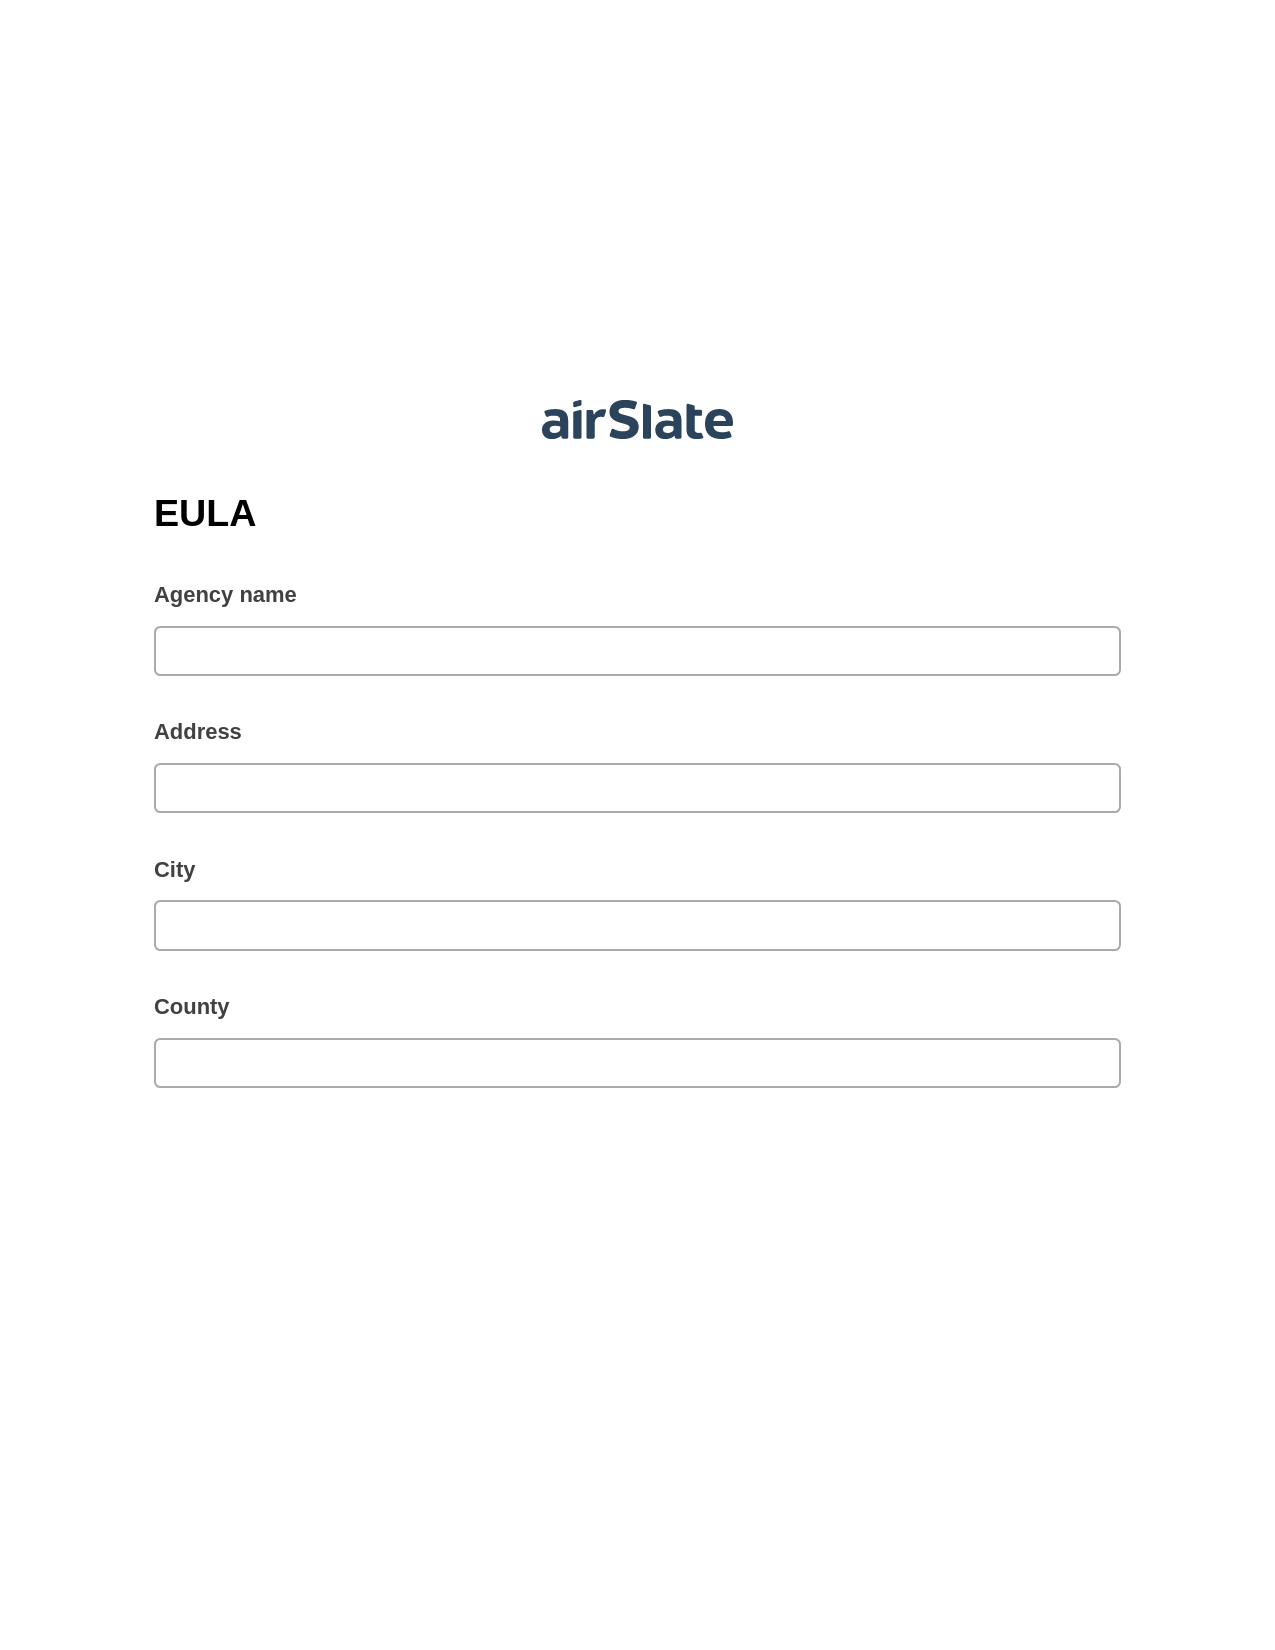 EULA Pre-fill from another Slate Bot, Jira Bot, Export to Smartsheet